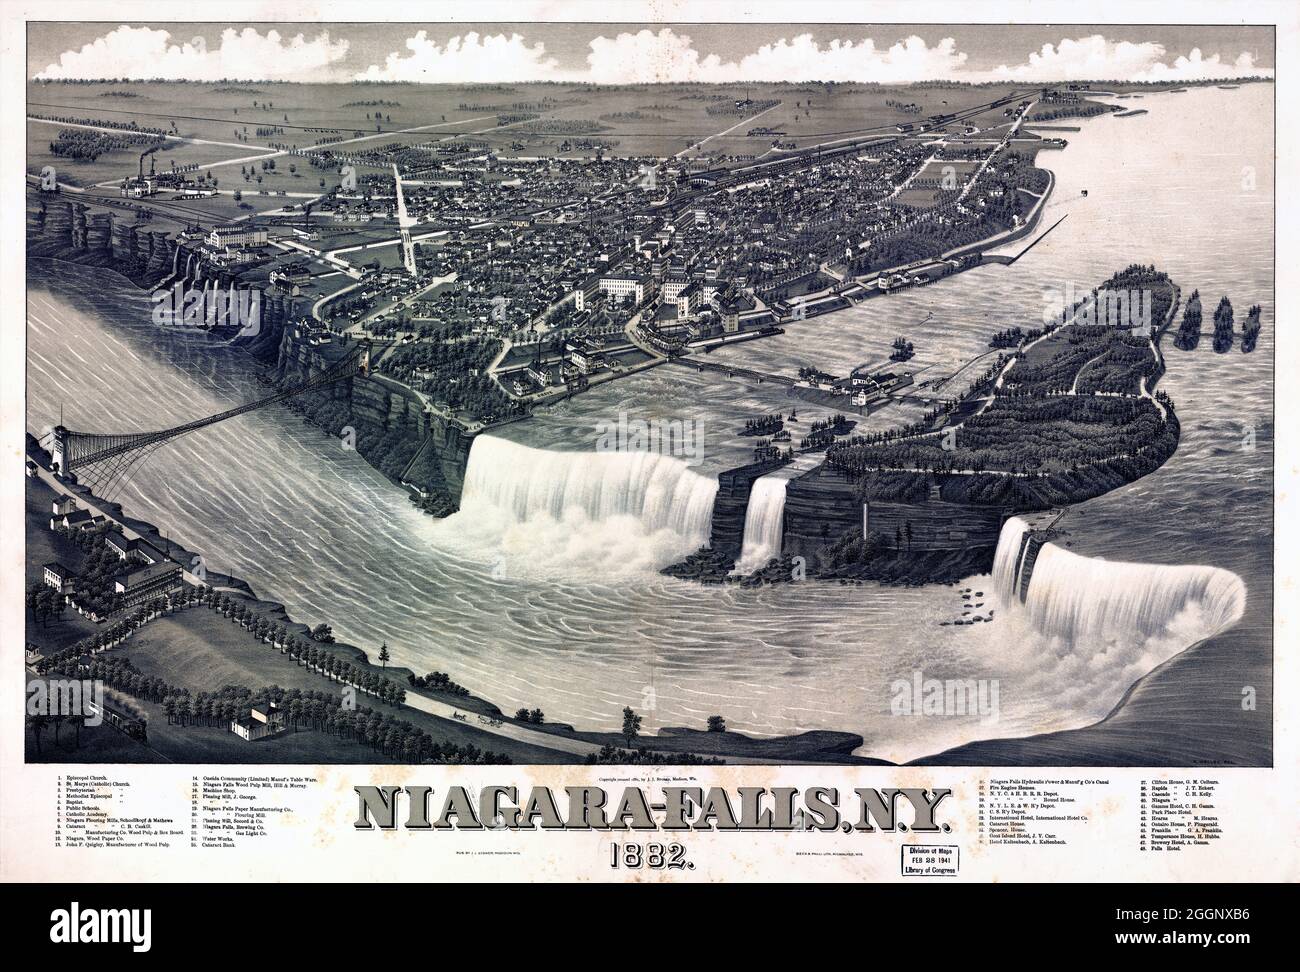 Niagara-Falls, N.Y. 1882. Restored vintage map published in 1882 in the USA. Stock Photo